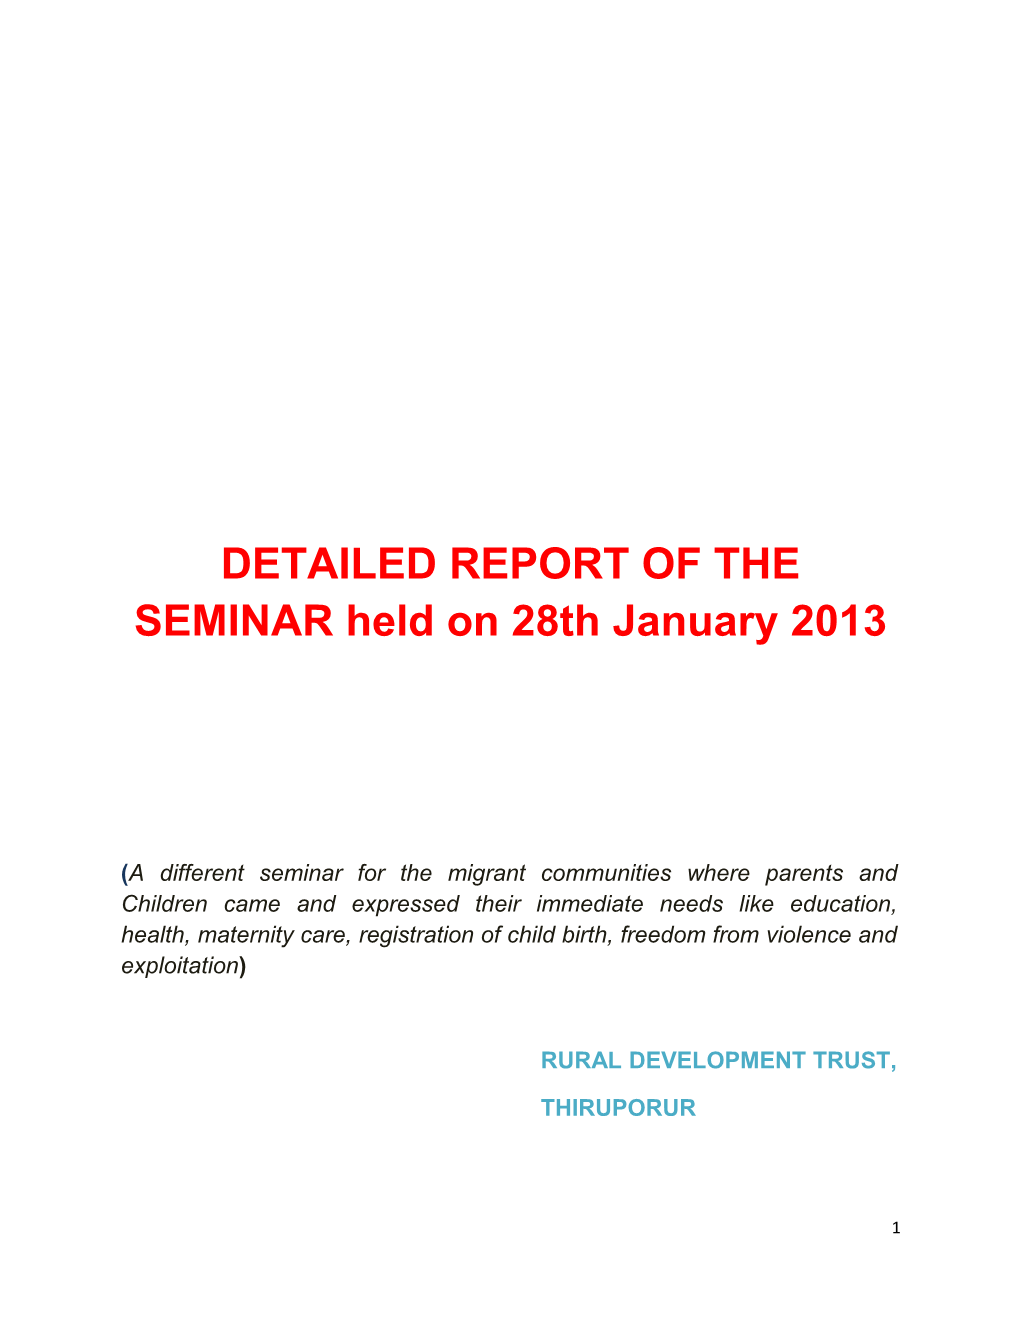 DETAILED REPORT of the SEMINAR Held on 28Th January 2013